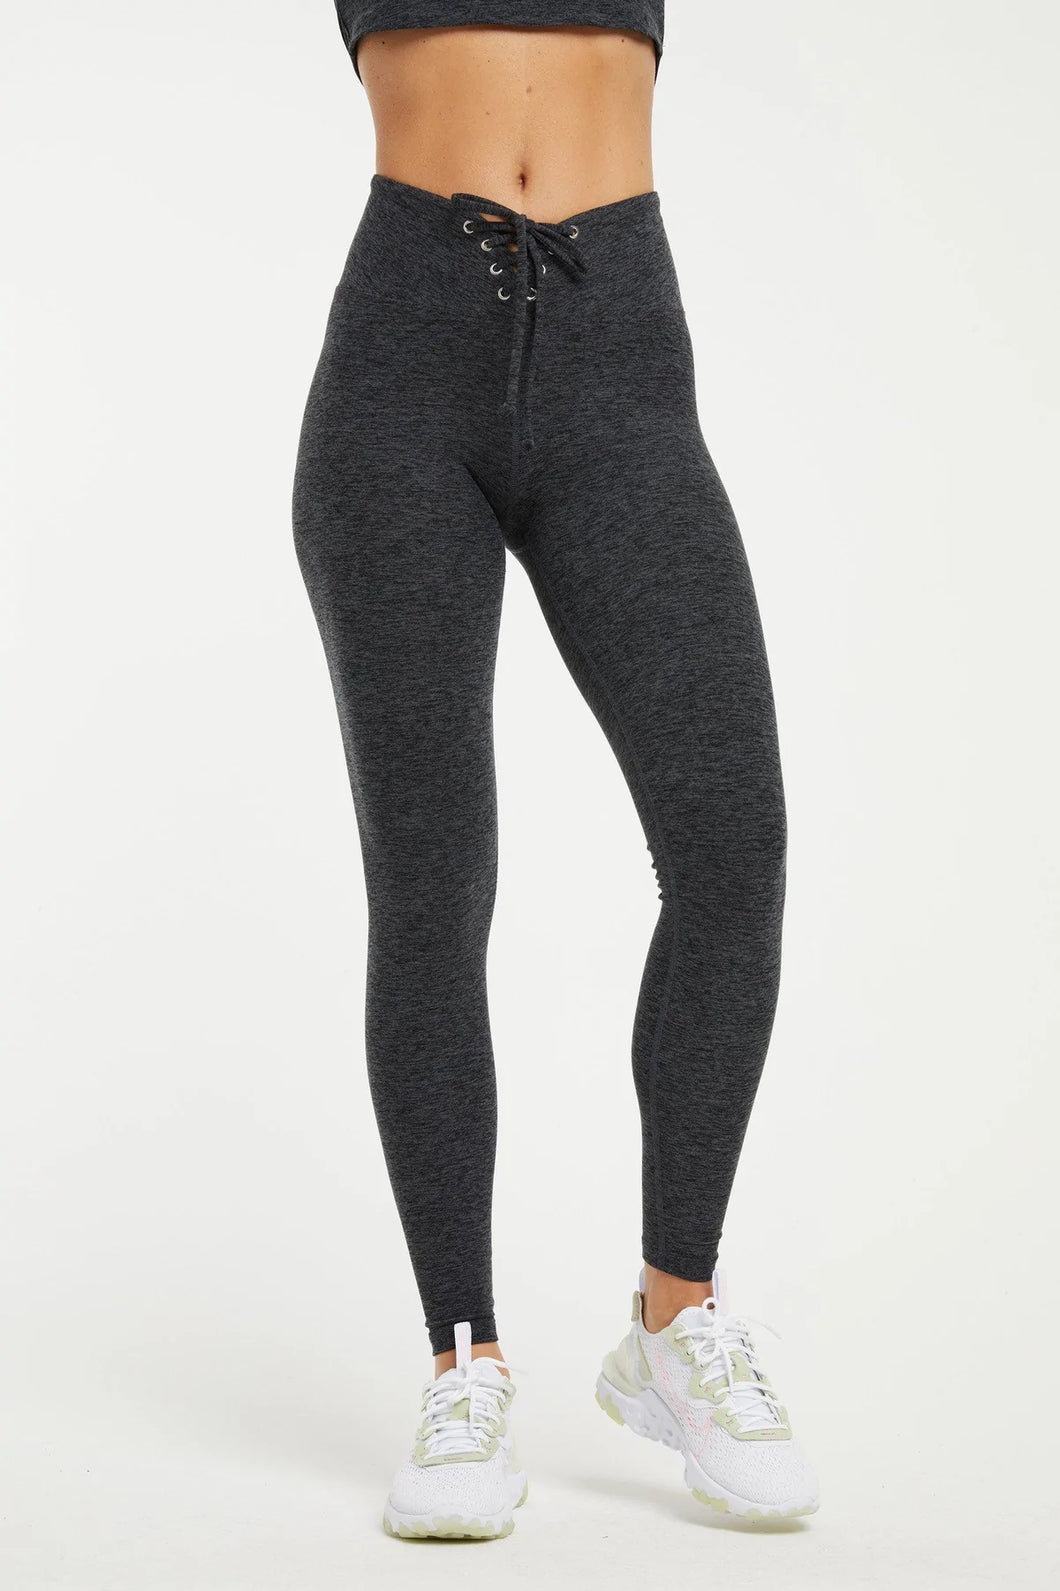 Year Of Ours Stretch Football Legging - Charcoal